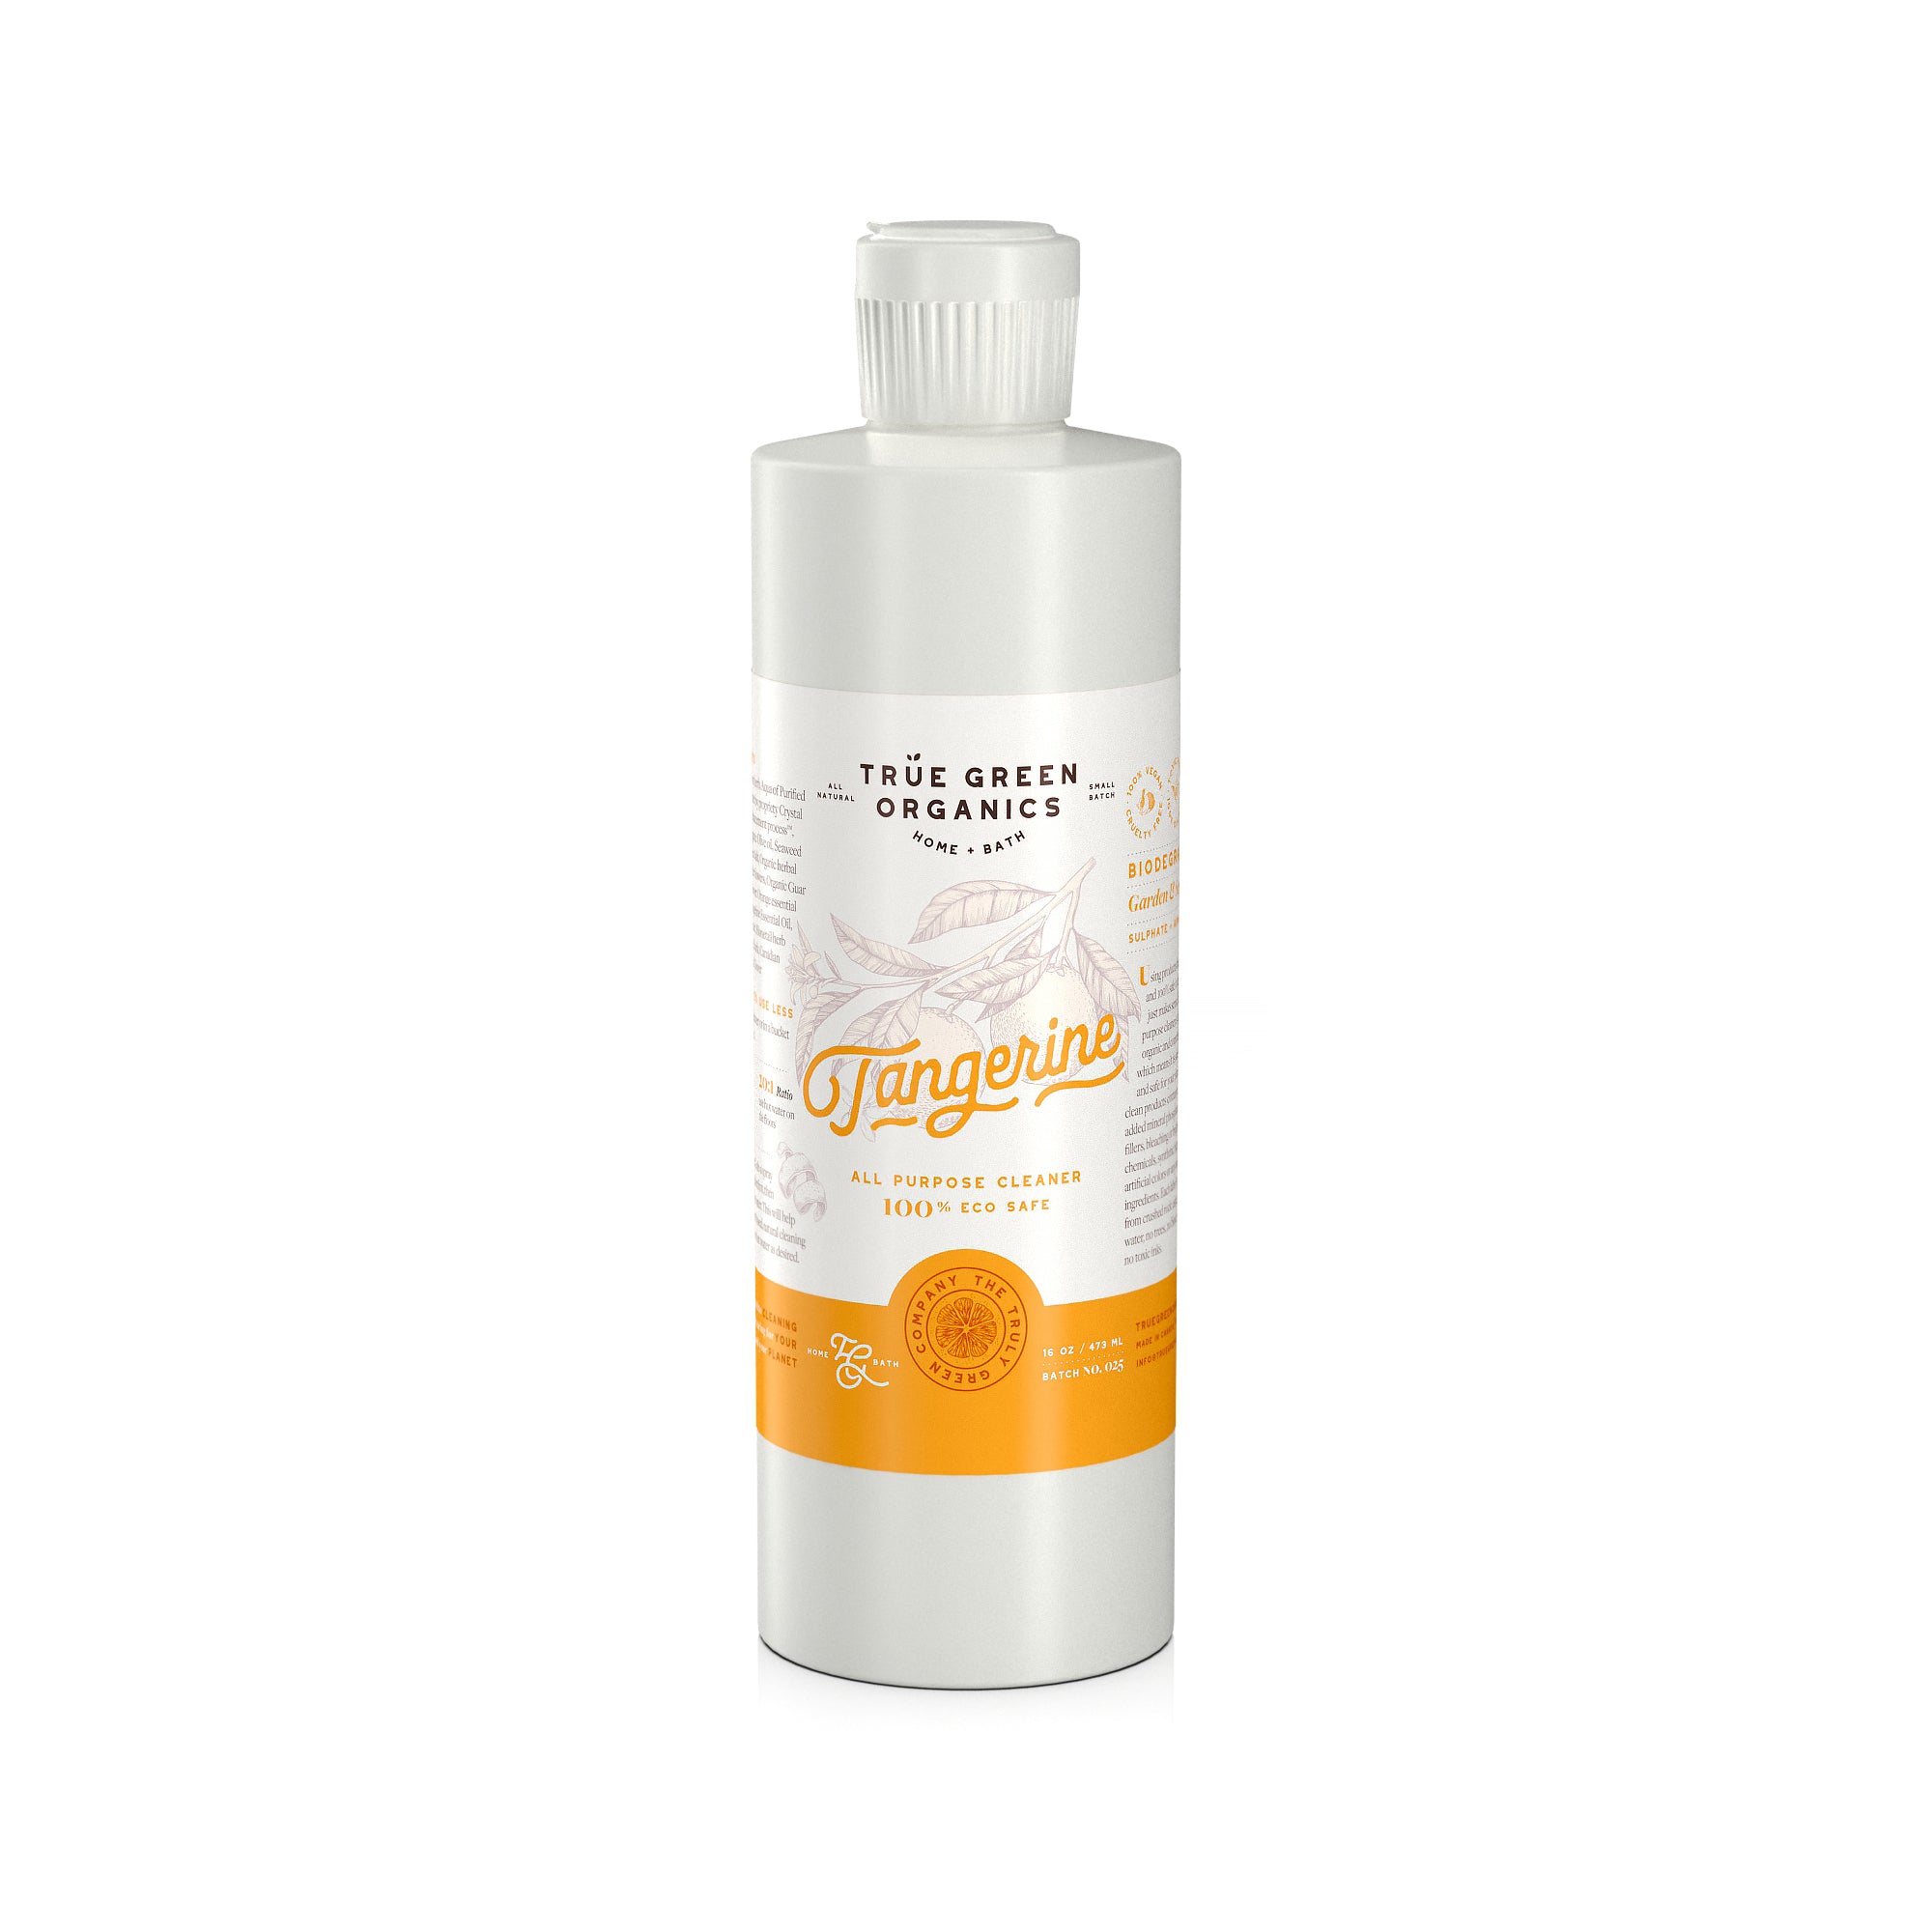 Tangerine Clean 100% Organic All Purpose Cleaner 2 Month Supply (16oz)